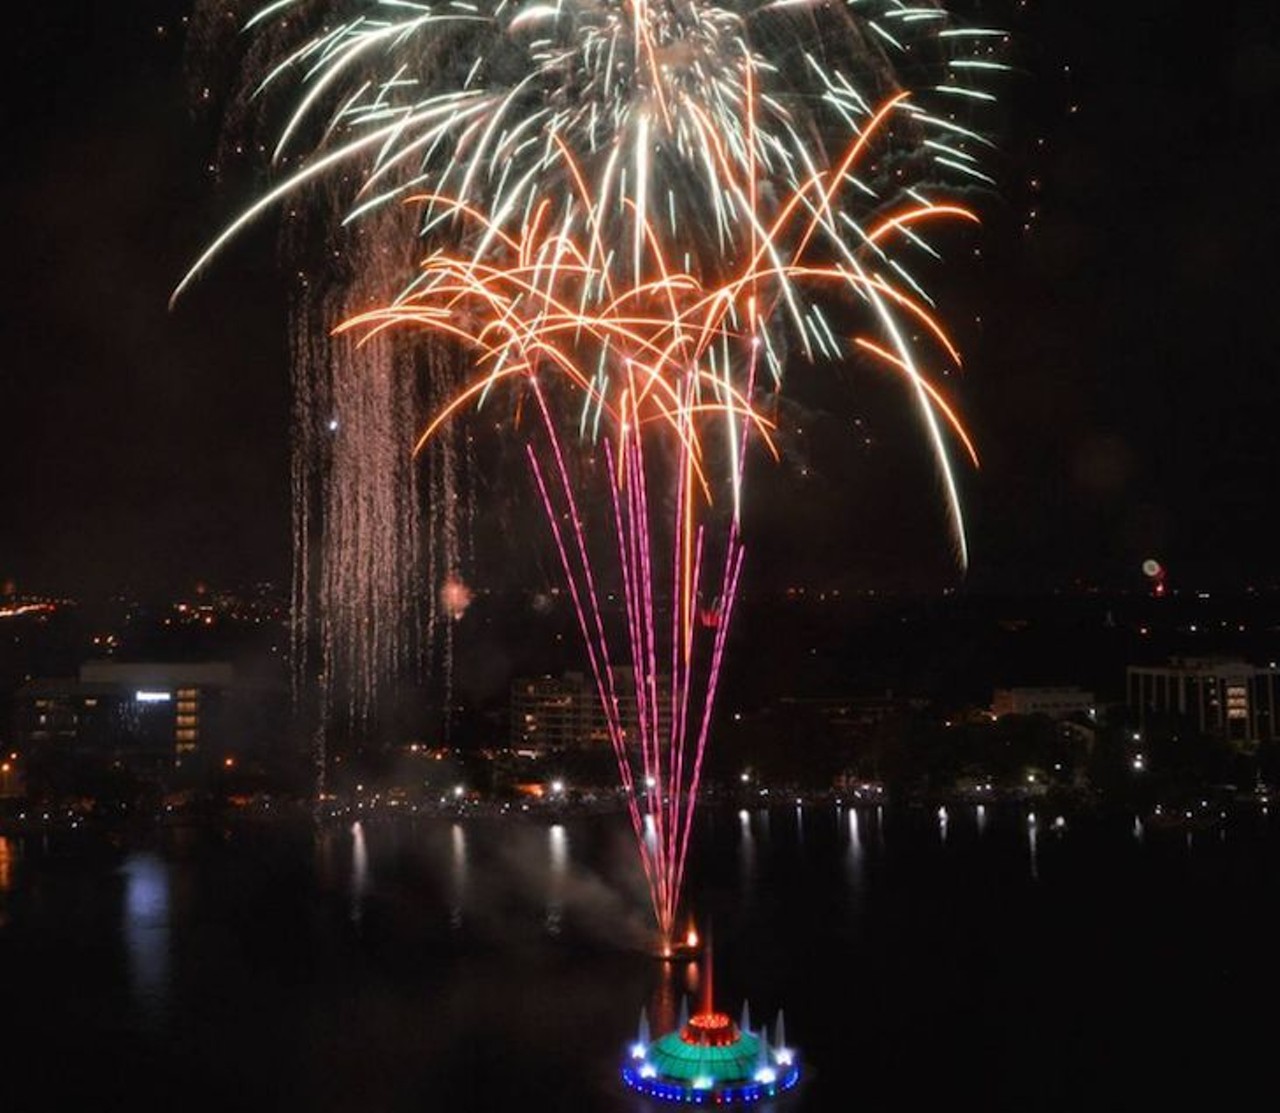 Fireworks at the Fountain
July 4 | 4-10 pm | Lake Eola Park, 195 N. Rosalind Ave. | free 
Join the City of Orlando at Lake Eola for the 40th annual Fireworks at the Fountain celebration in honor of Independence Day. Live entertainment begins at 4 pm, and the fireworks begin at 9:20 pm. There will be a play area for kids, along with tons of food and beverage vendors.
Photo via cuzzintruck/Instagram